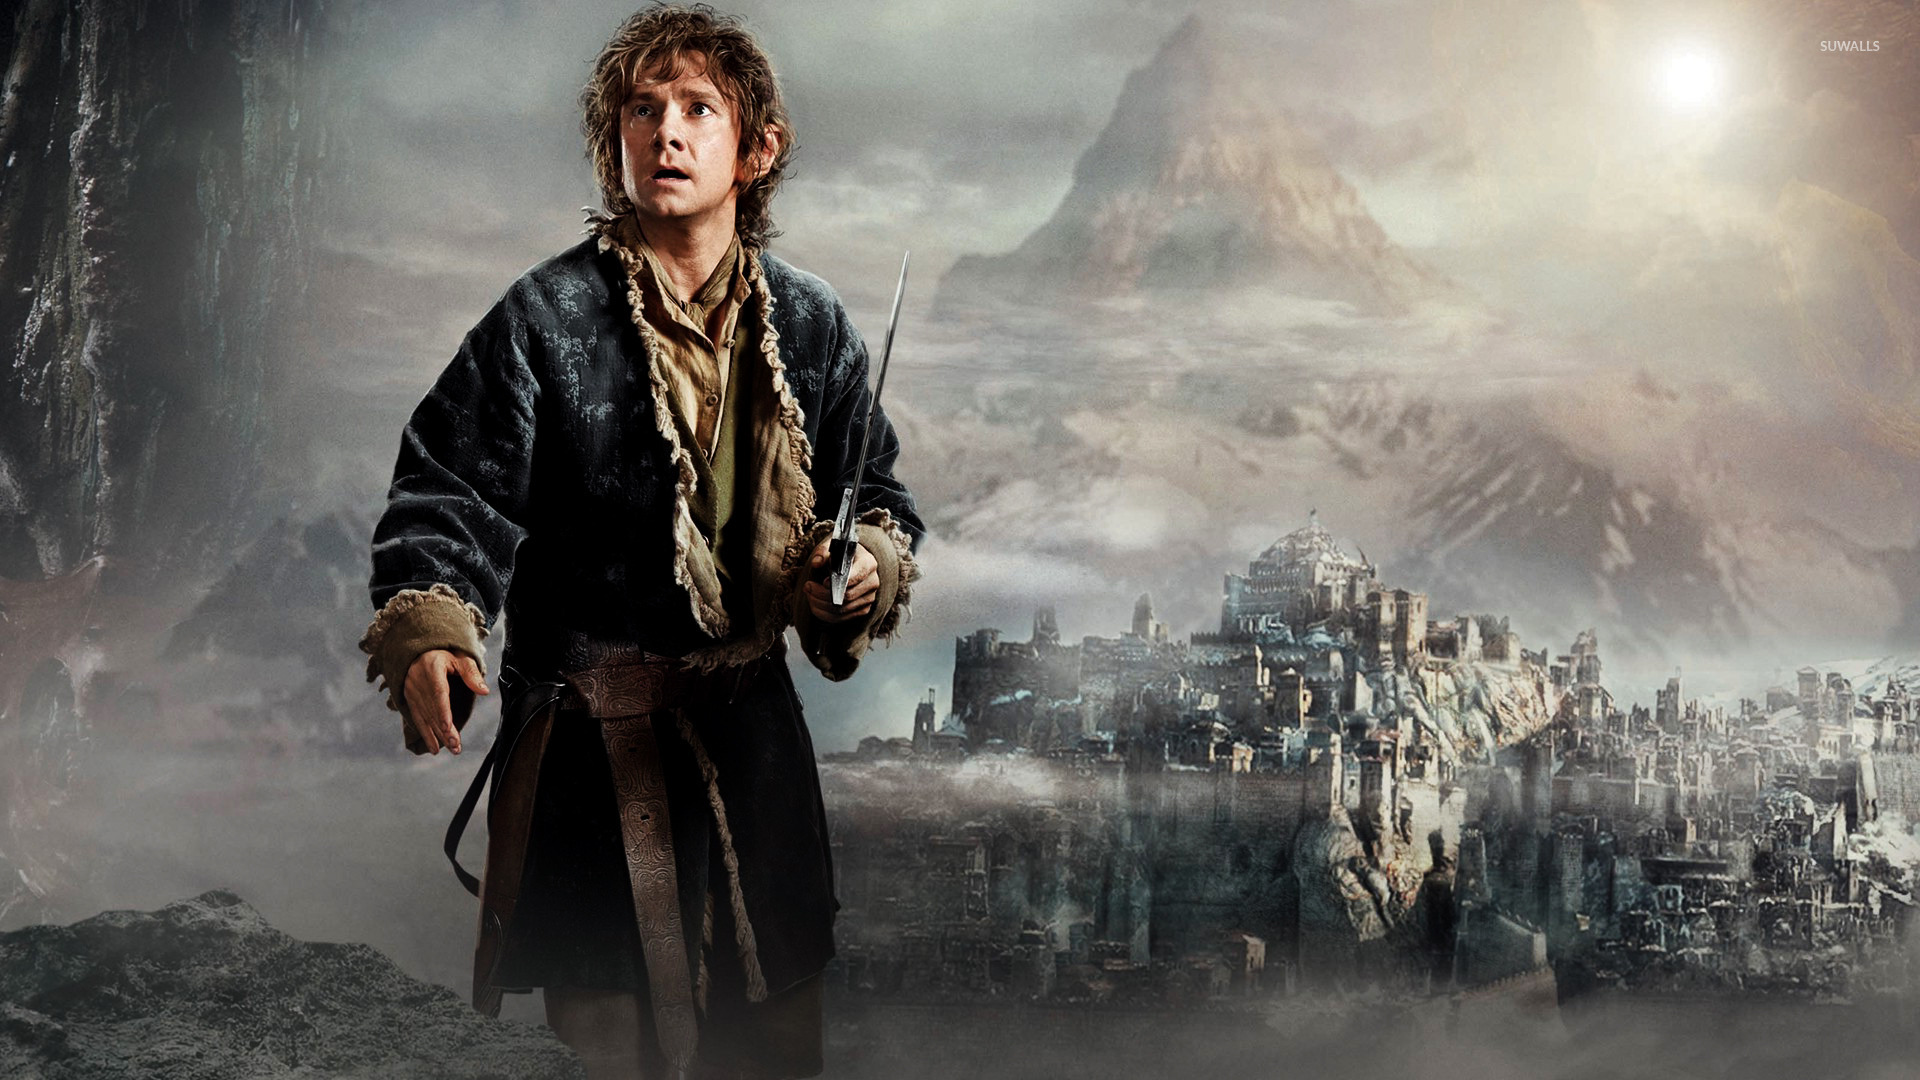 The Hobbit: The Desolation of Smaug 2013 watch The